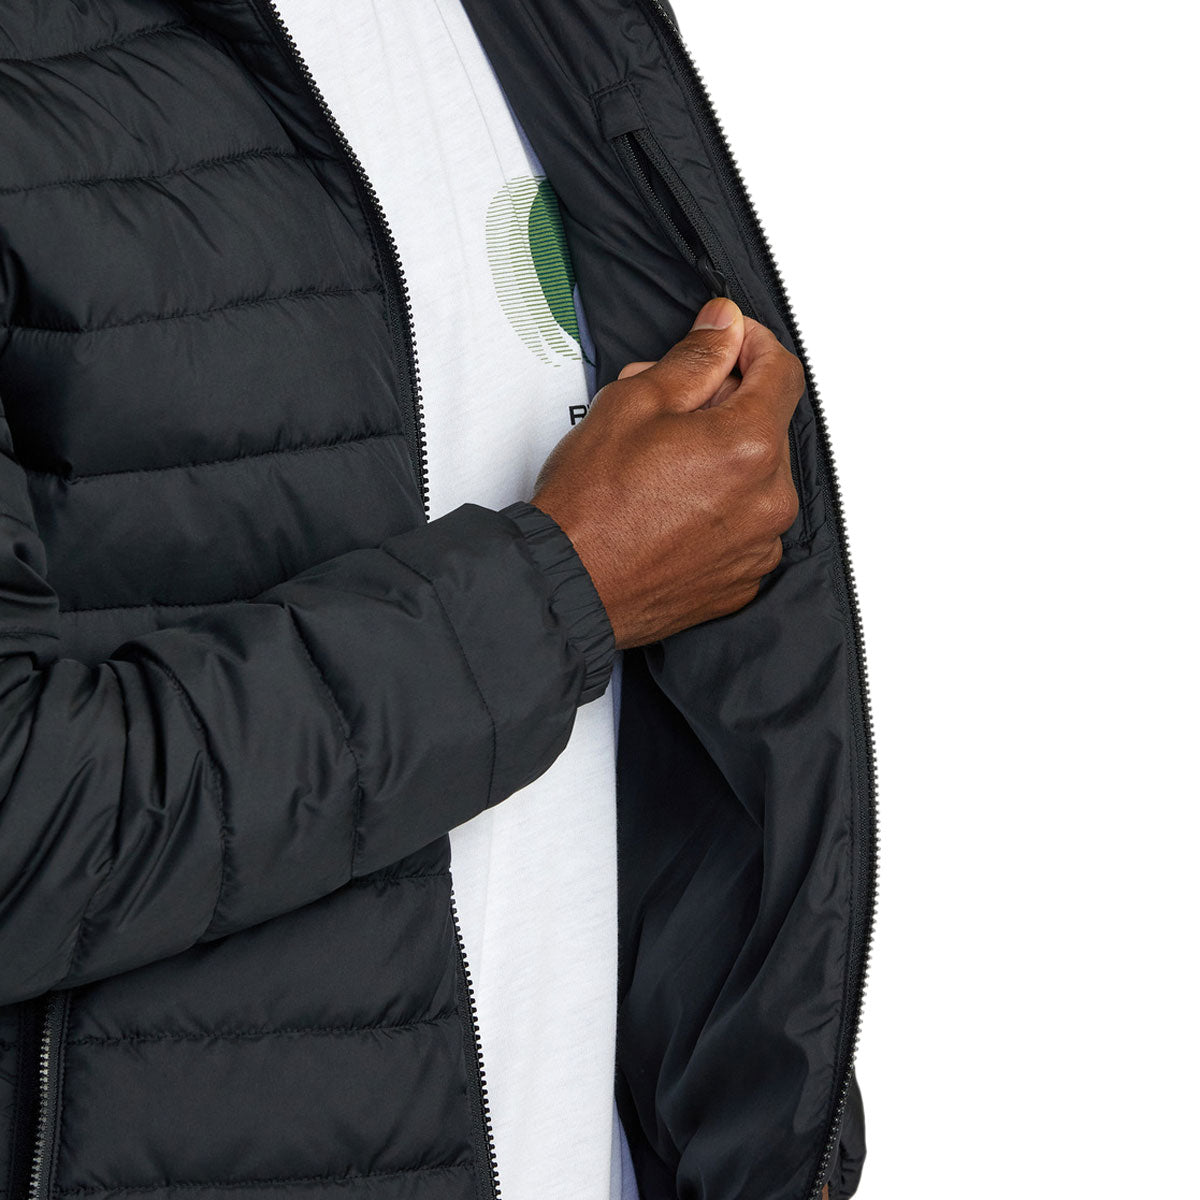 RVCA Packable Puffa Hooded Jacket - Black image 5